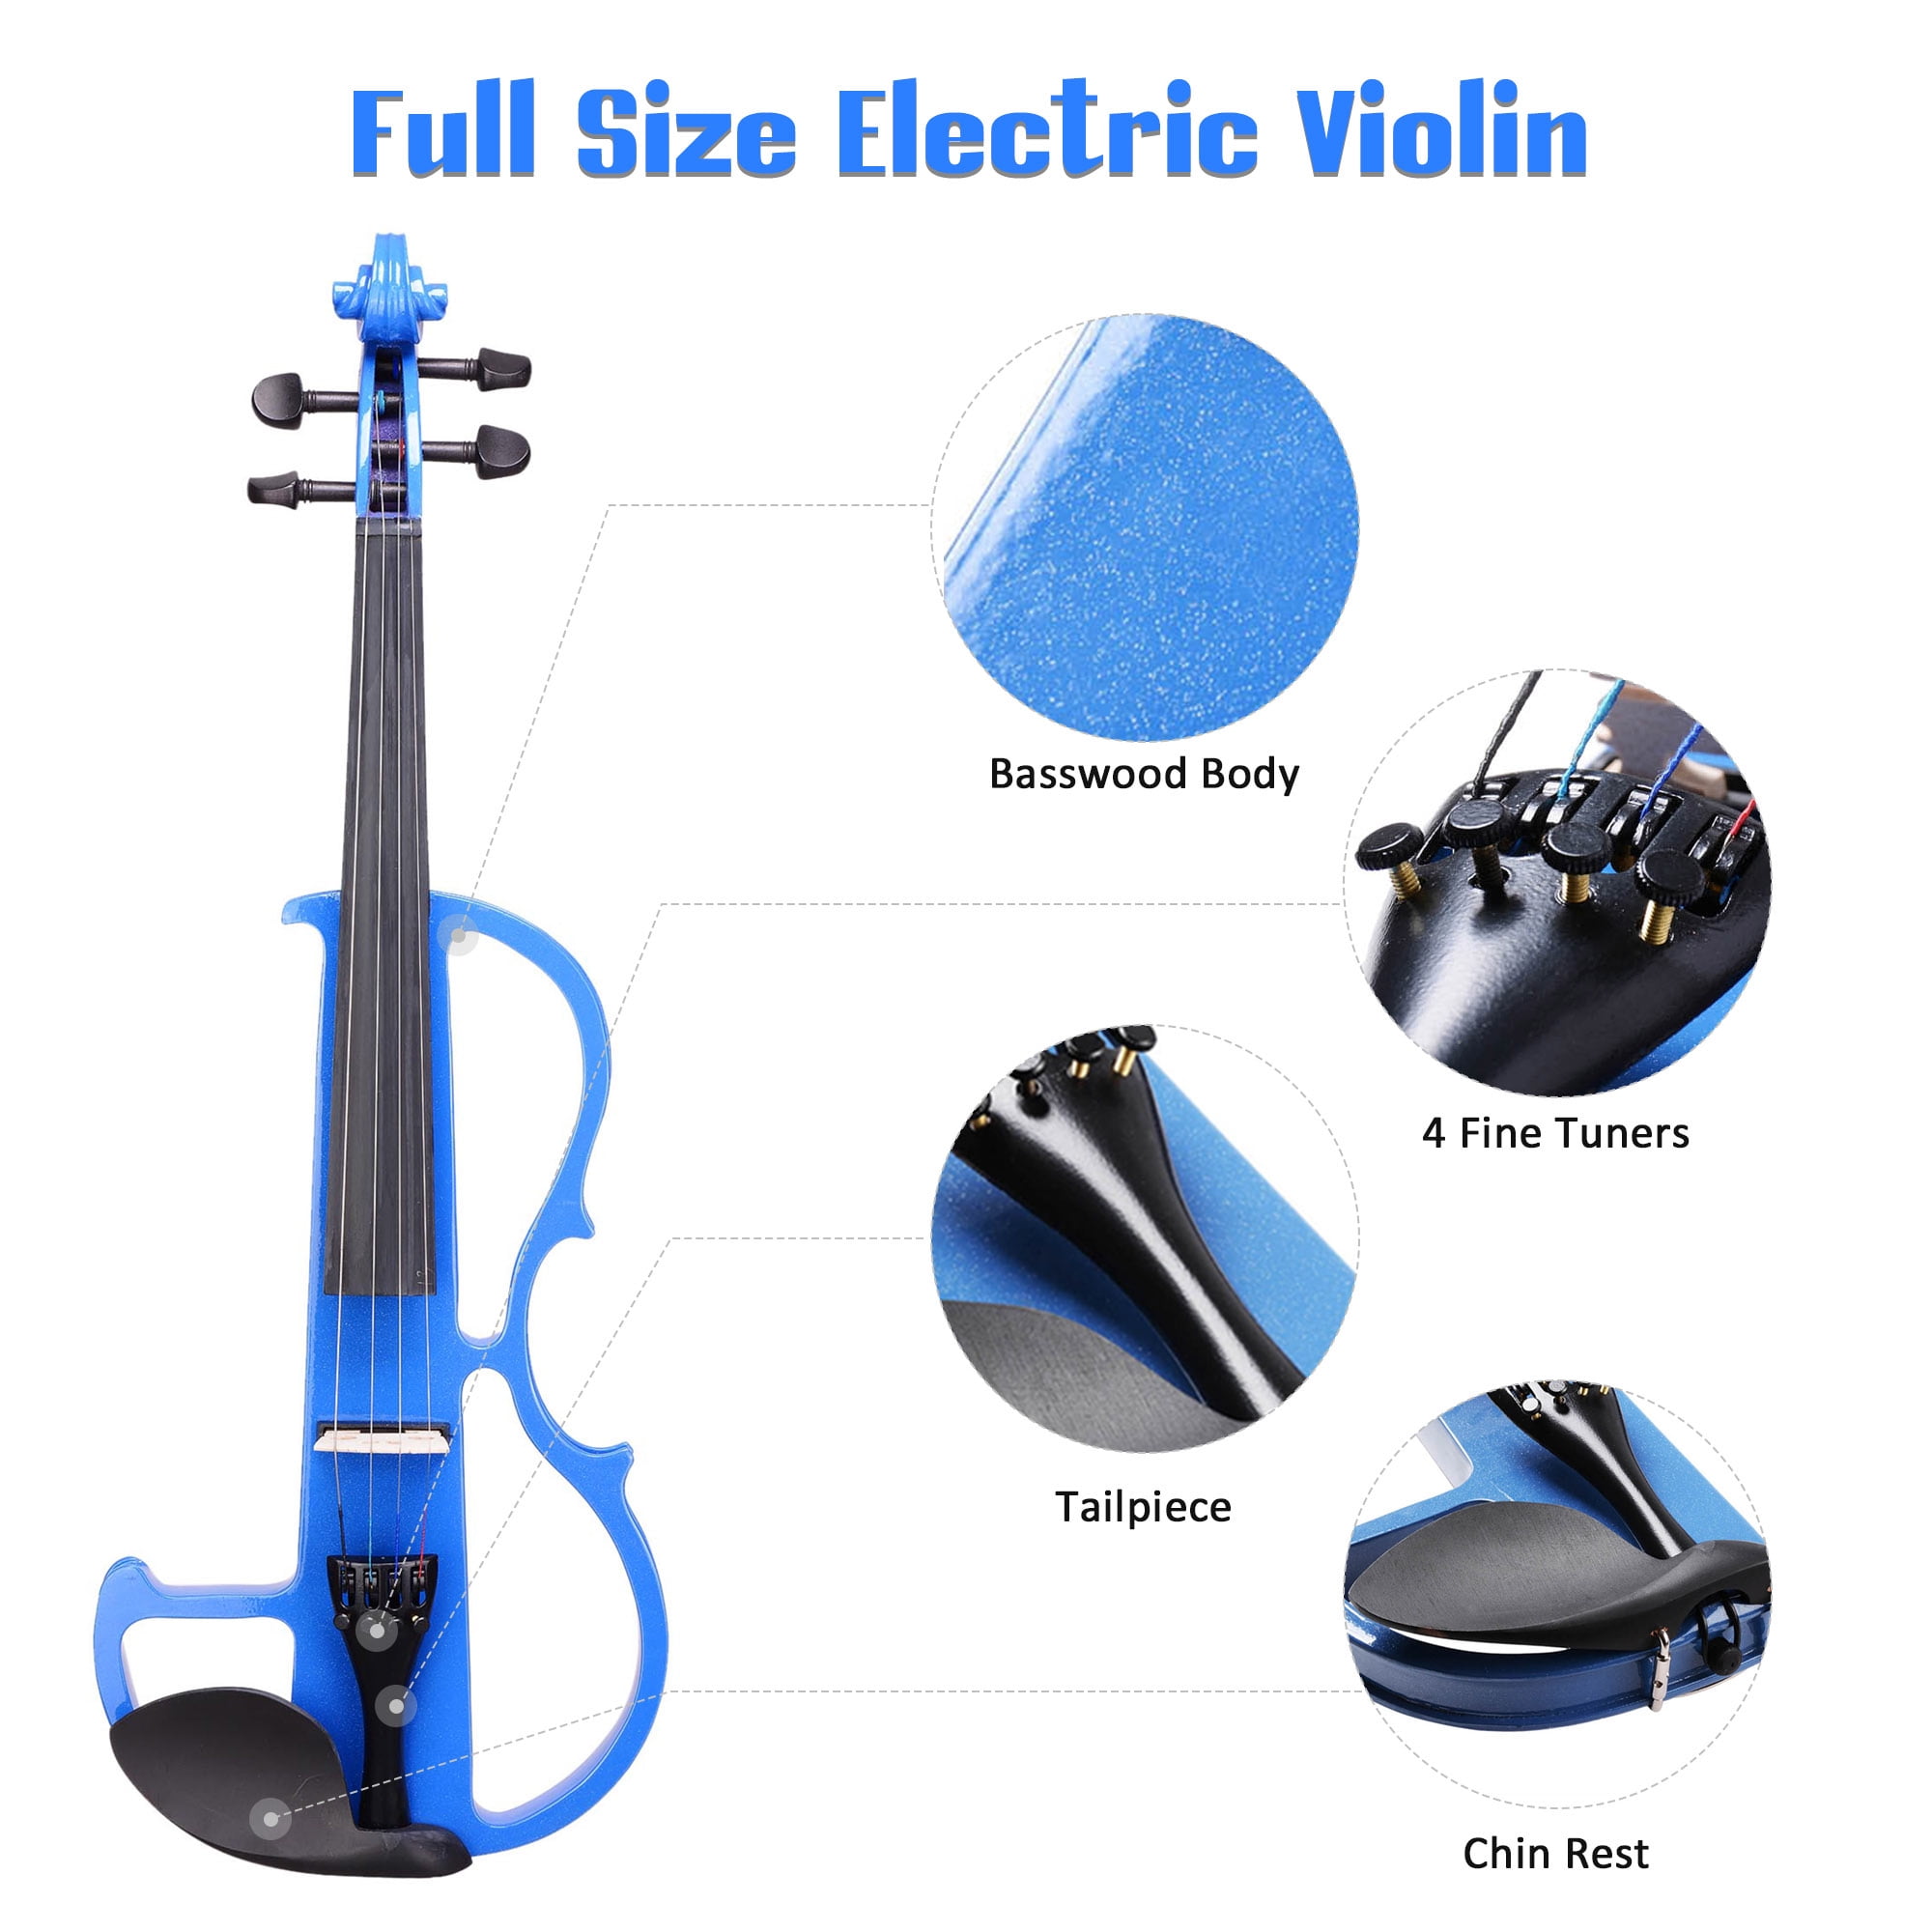 Octave Strings, Electric Violins, 3D-Printed Violins and other fun stuff  from NAMM 2017